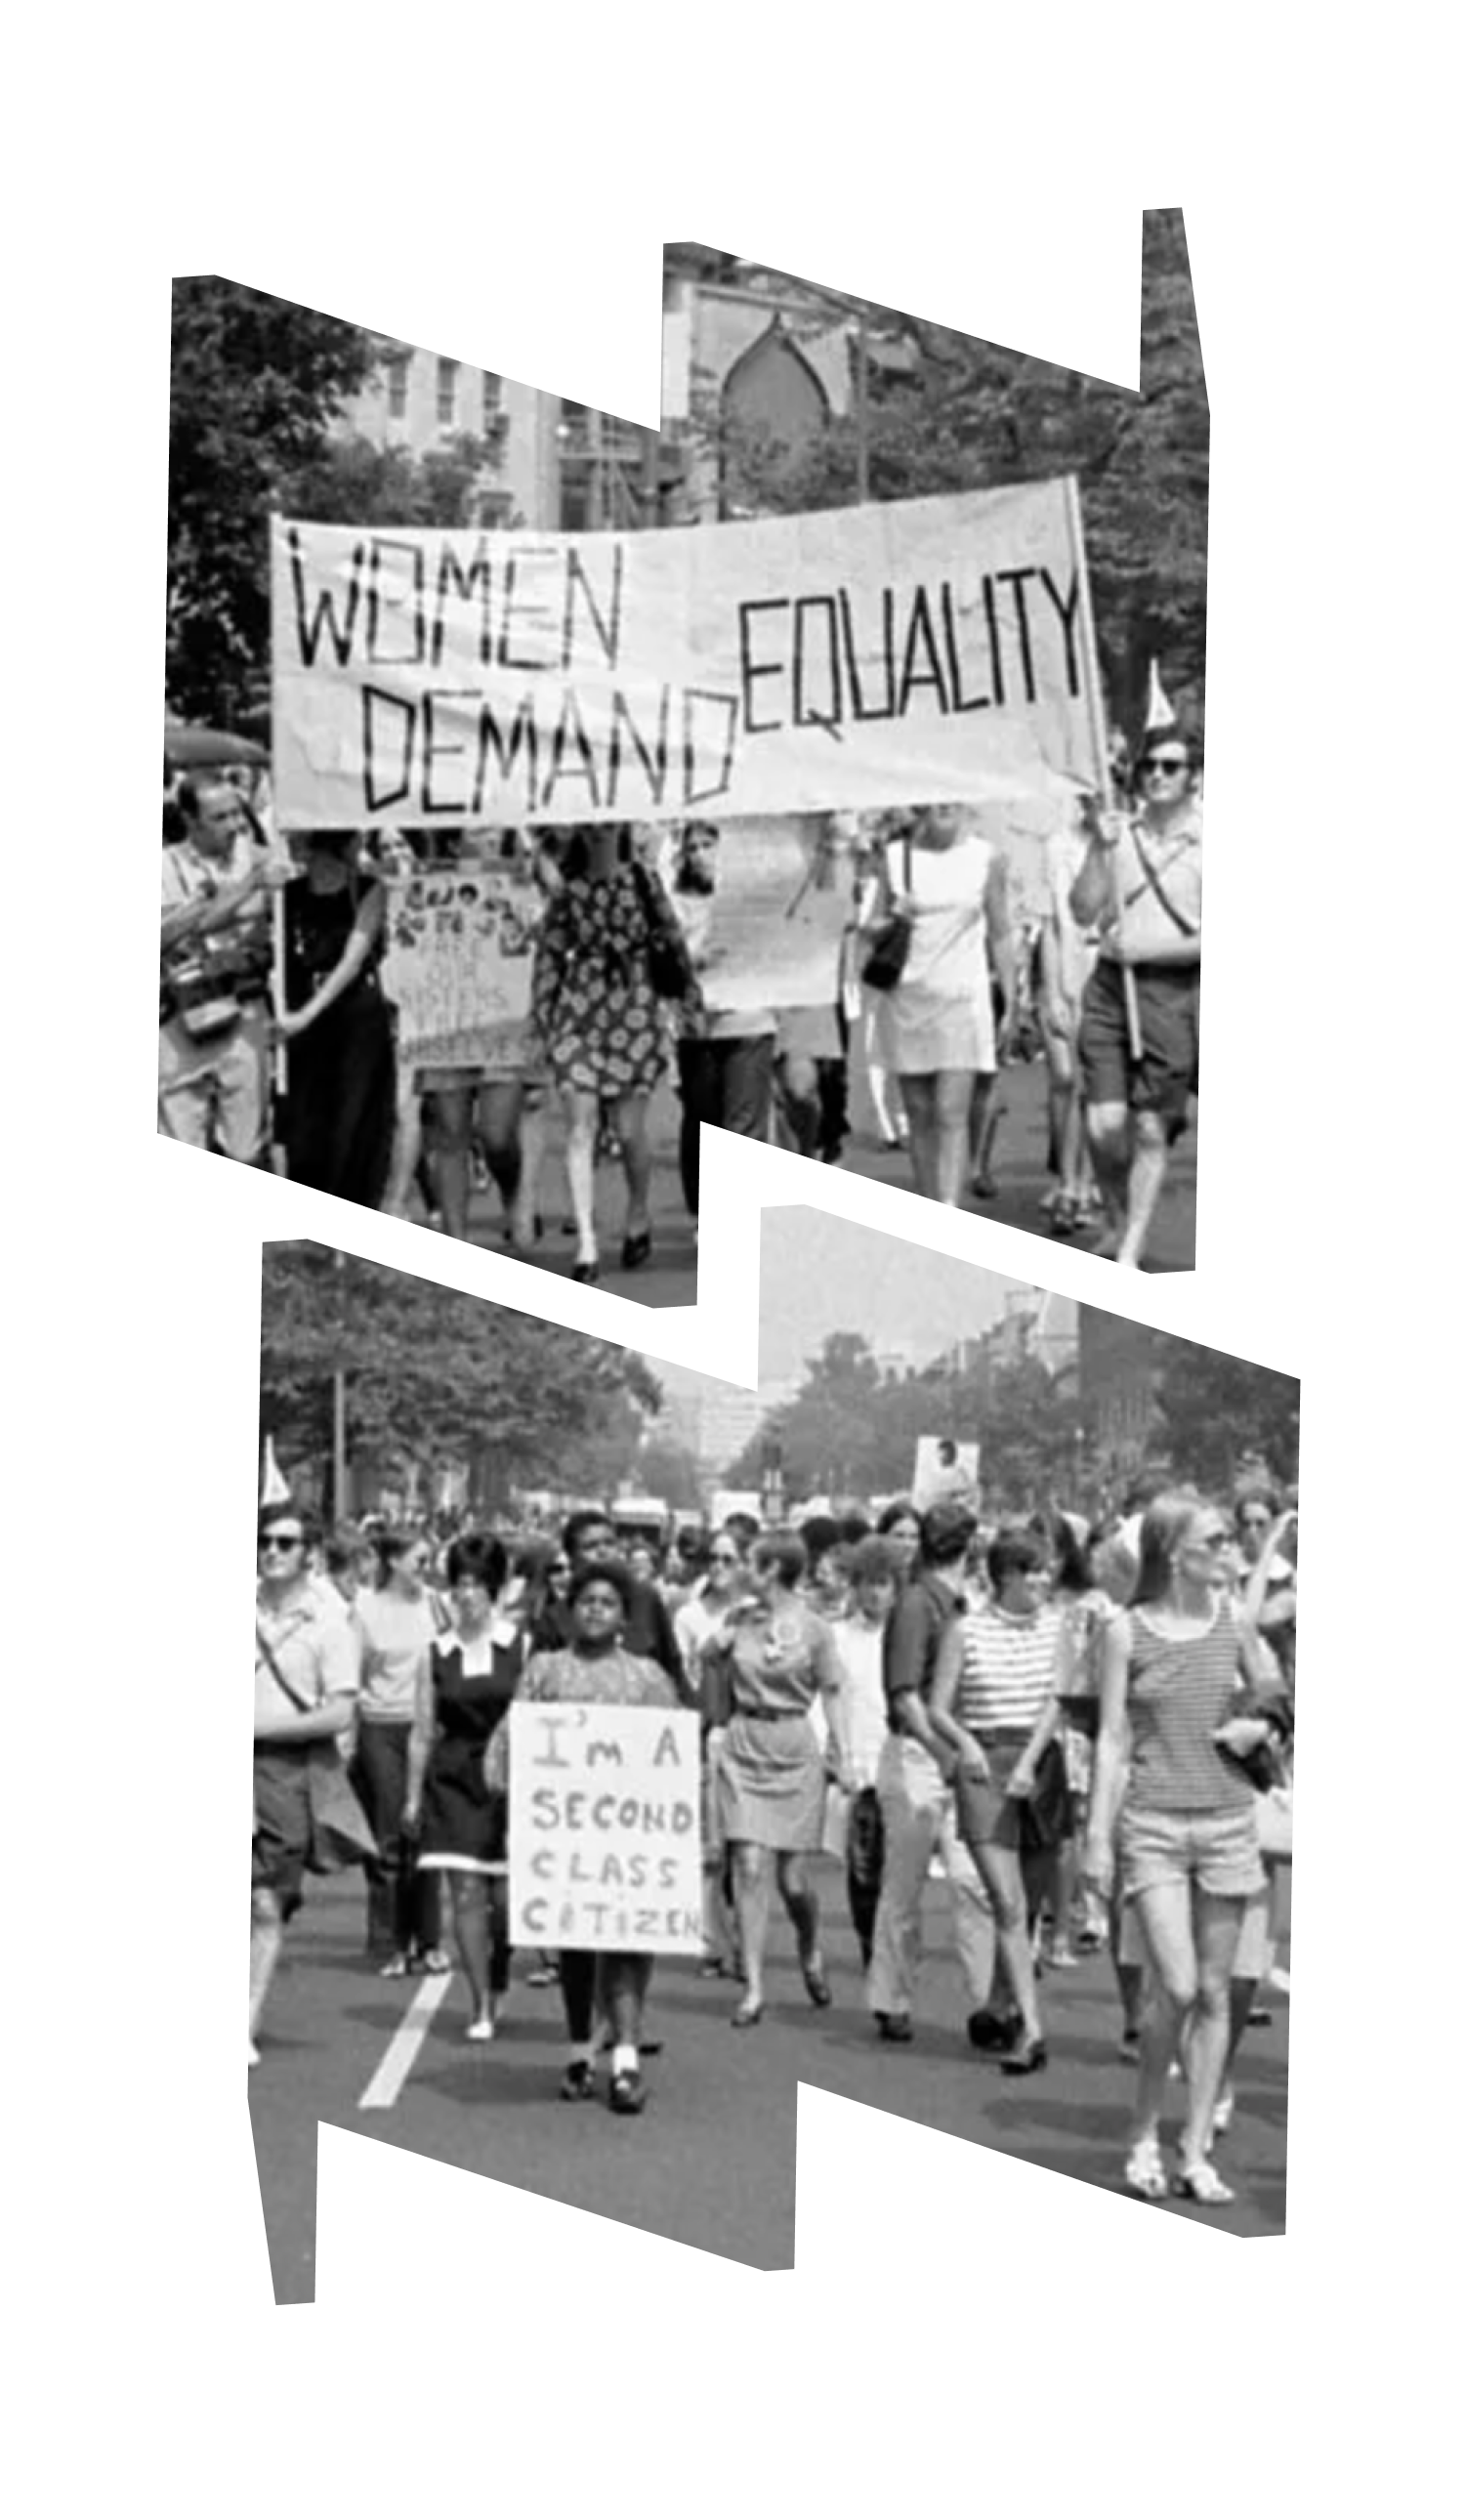 Women's Rights Movements, Overview, Influence & Timeline - Lesson